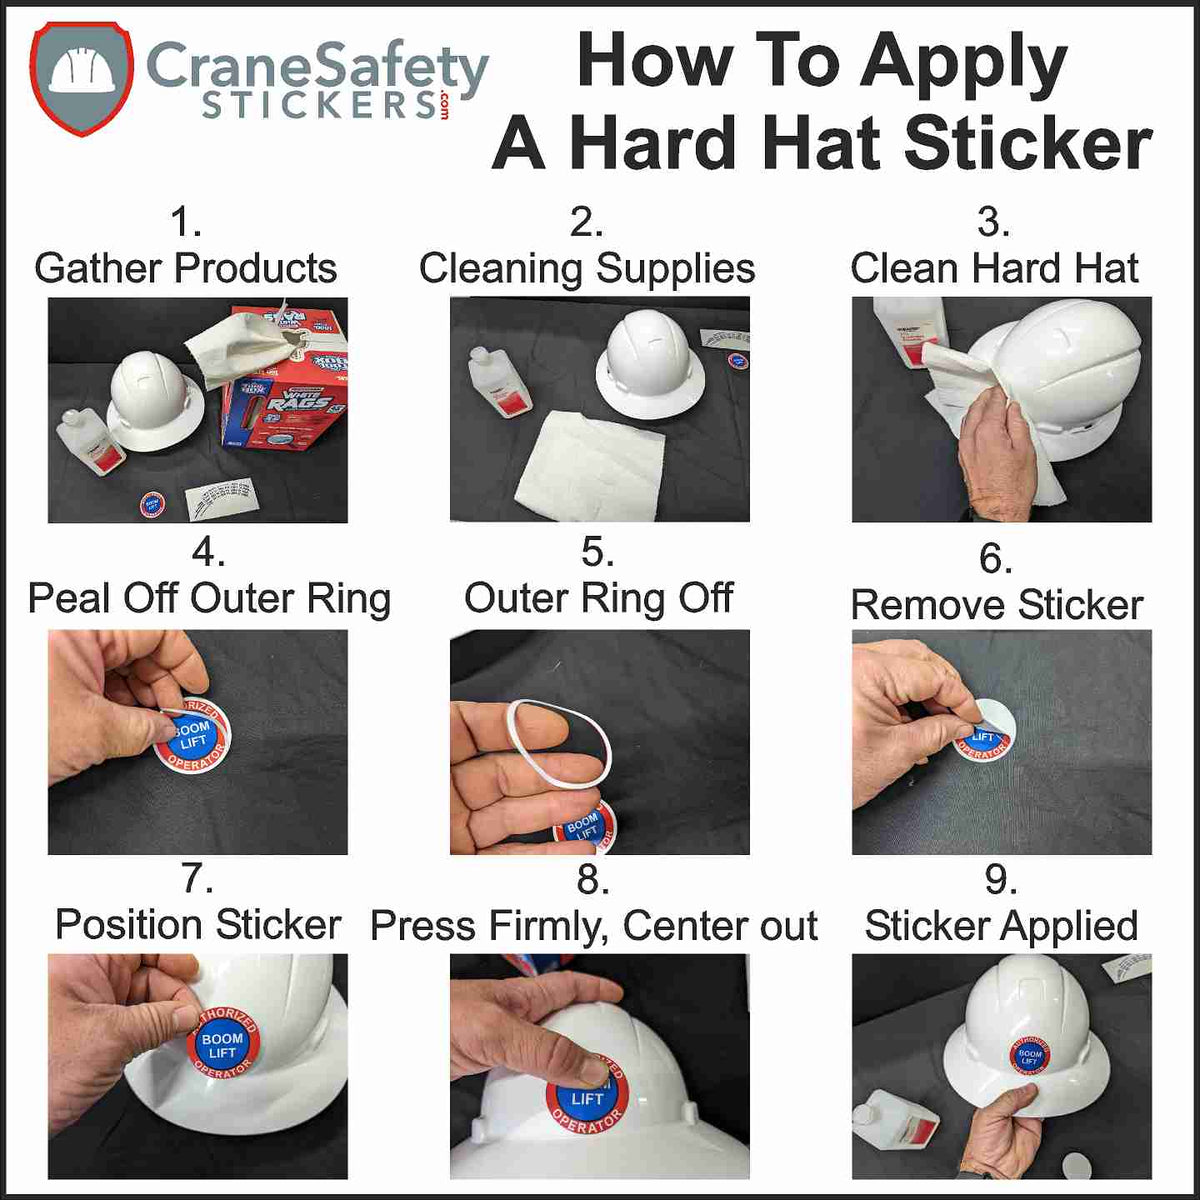 Directions on how to apply our safety and award winner sticker to a hard hat.